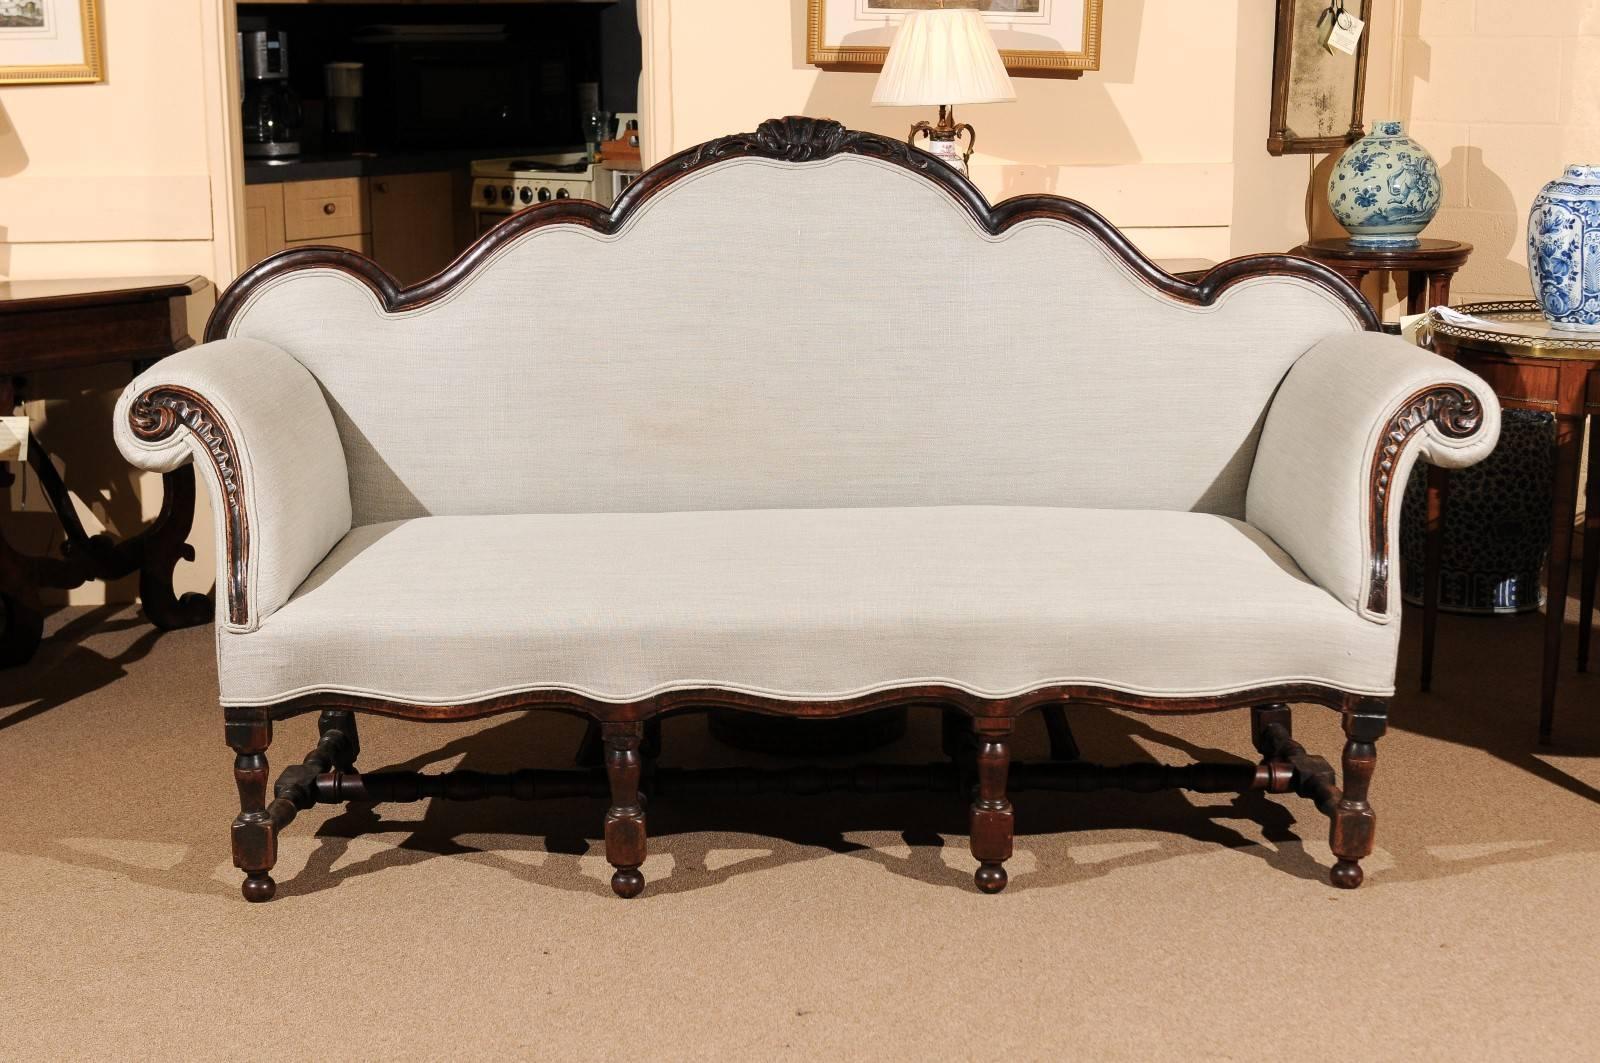 Transitional Louis XVIII or Rococo sofa in walnut with turned legs and stretcher, carved shaped back and scroll arms, Italy 18th century. Dark walnut finish and grey linen upholstery.